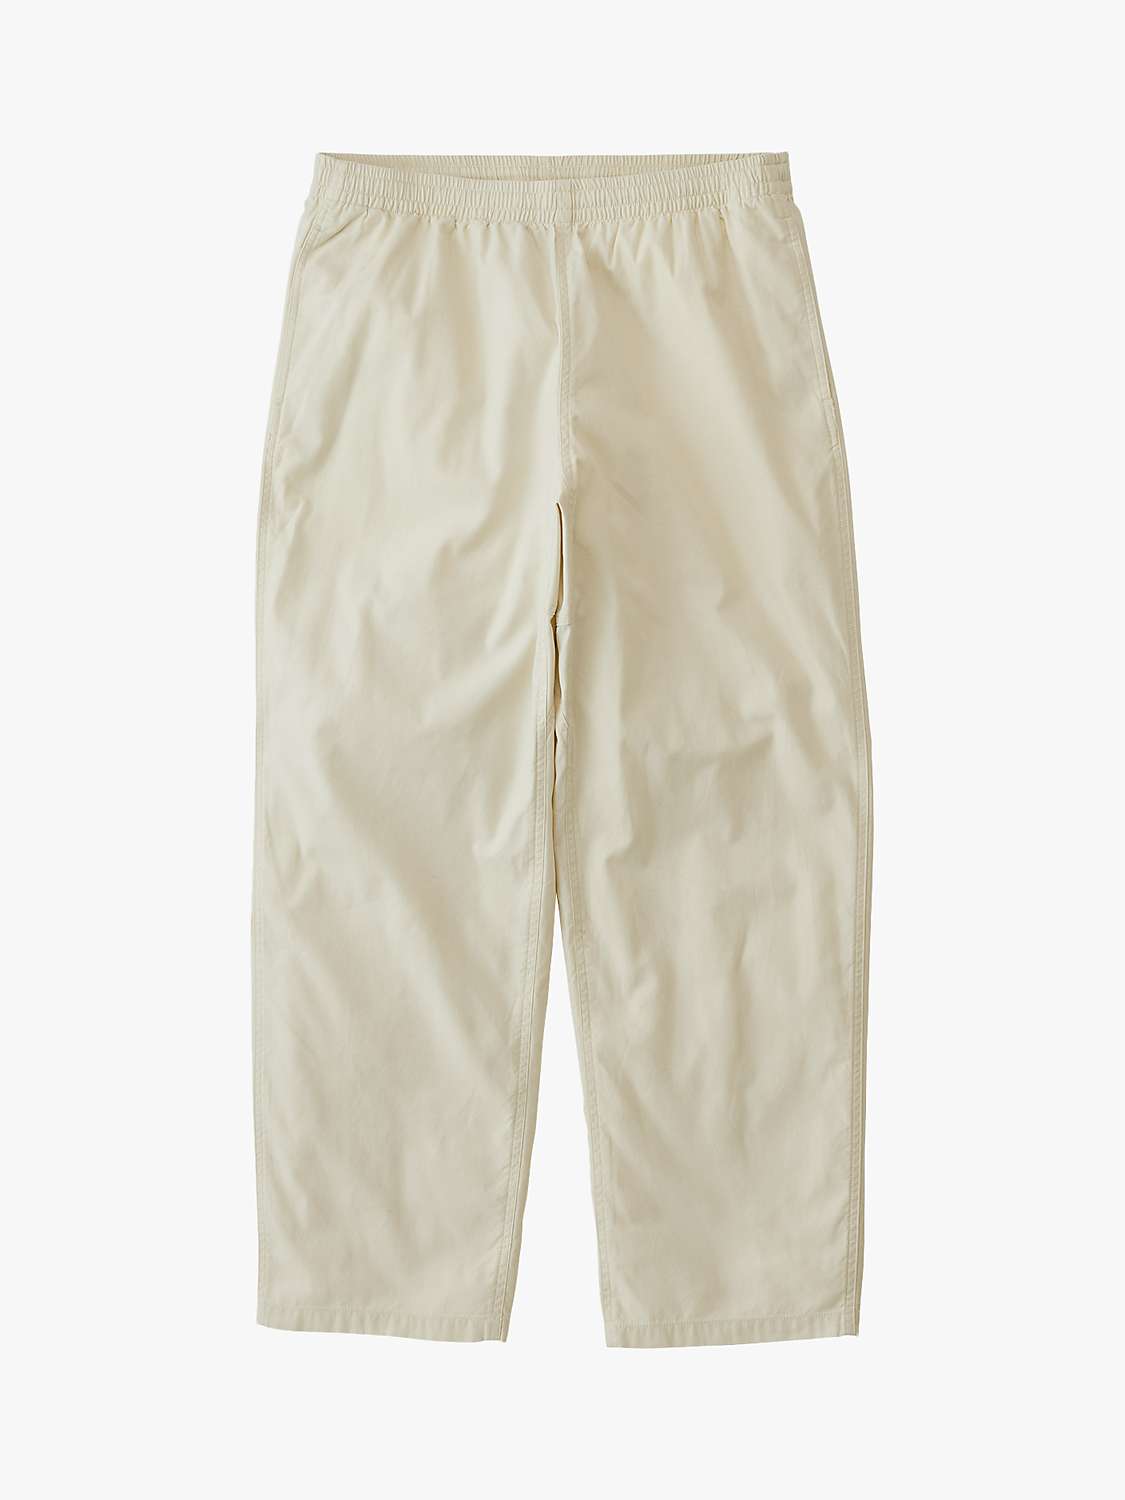 Buy Gramicci Swell Brushed Cotton Trousers, Sand Online at johnlewis.com